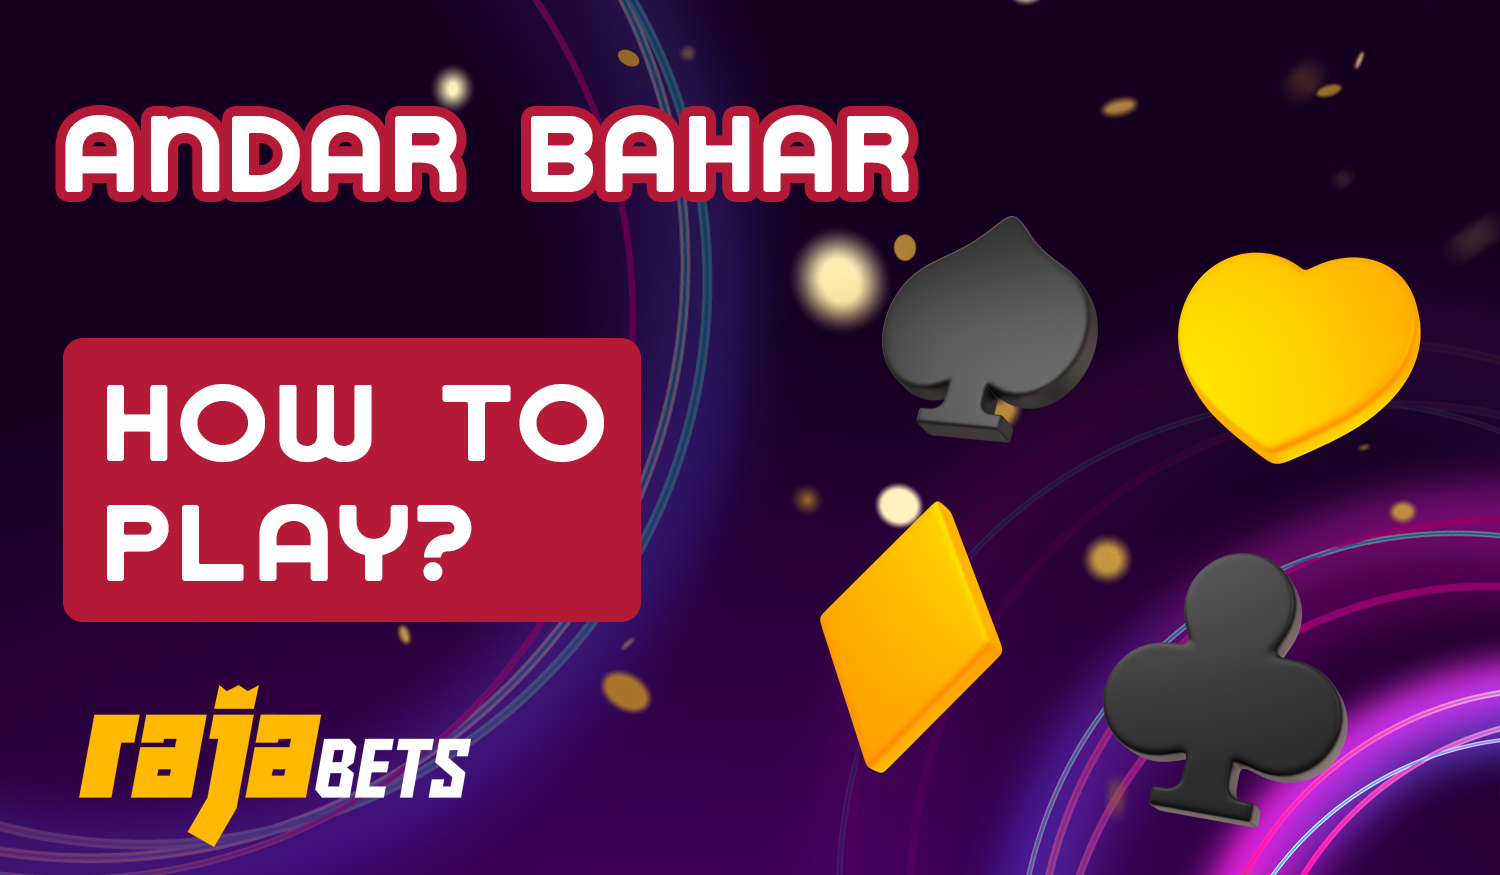 How beginners on Rajabets can start playing Andar Bahar